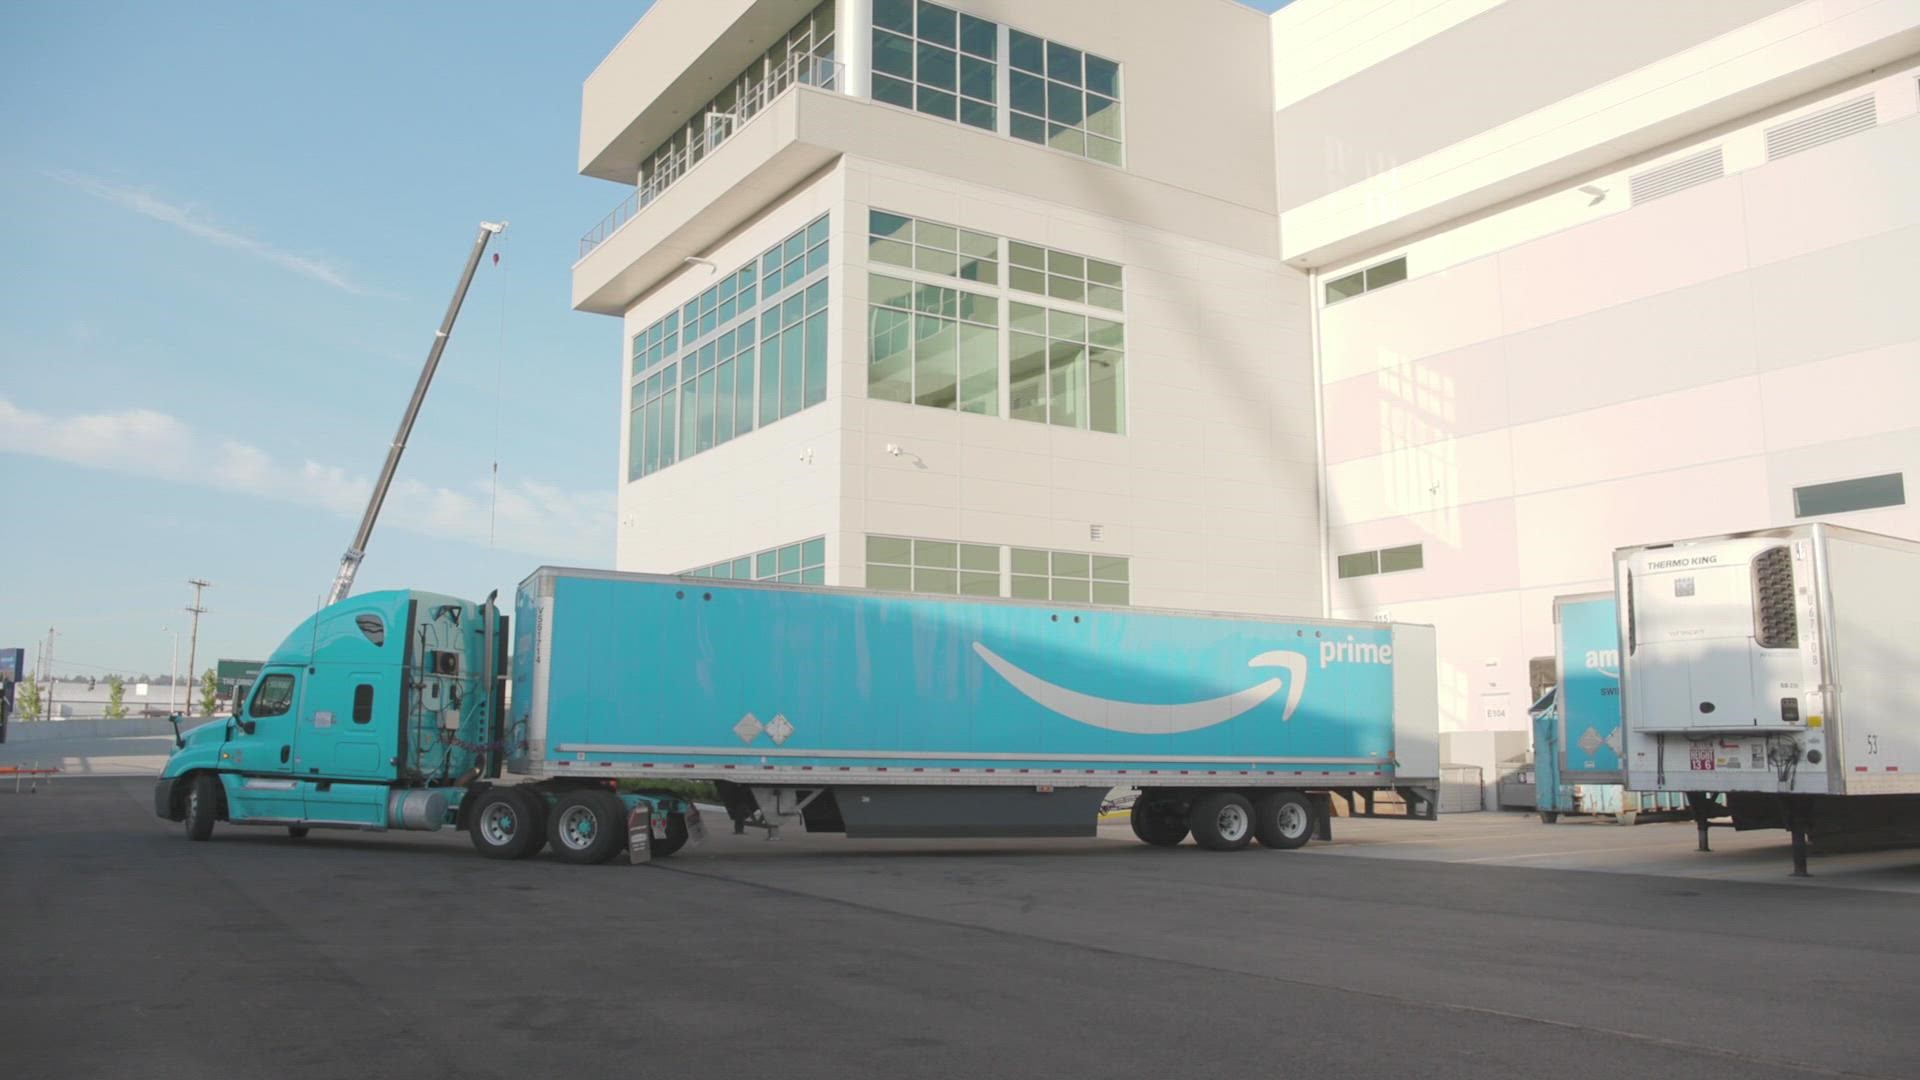 Amazon also announced a new mini-fulfillment center based in Middleburg Heights that will be used to hold popular and in-demand items.